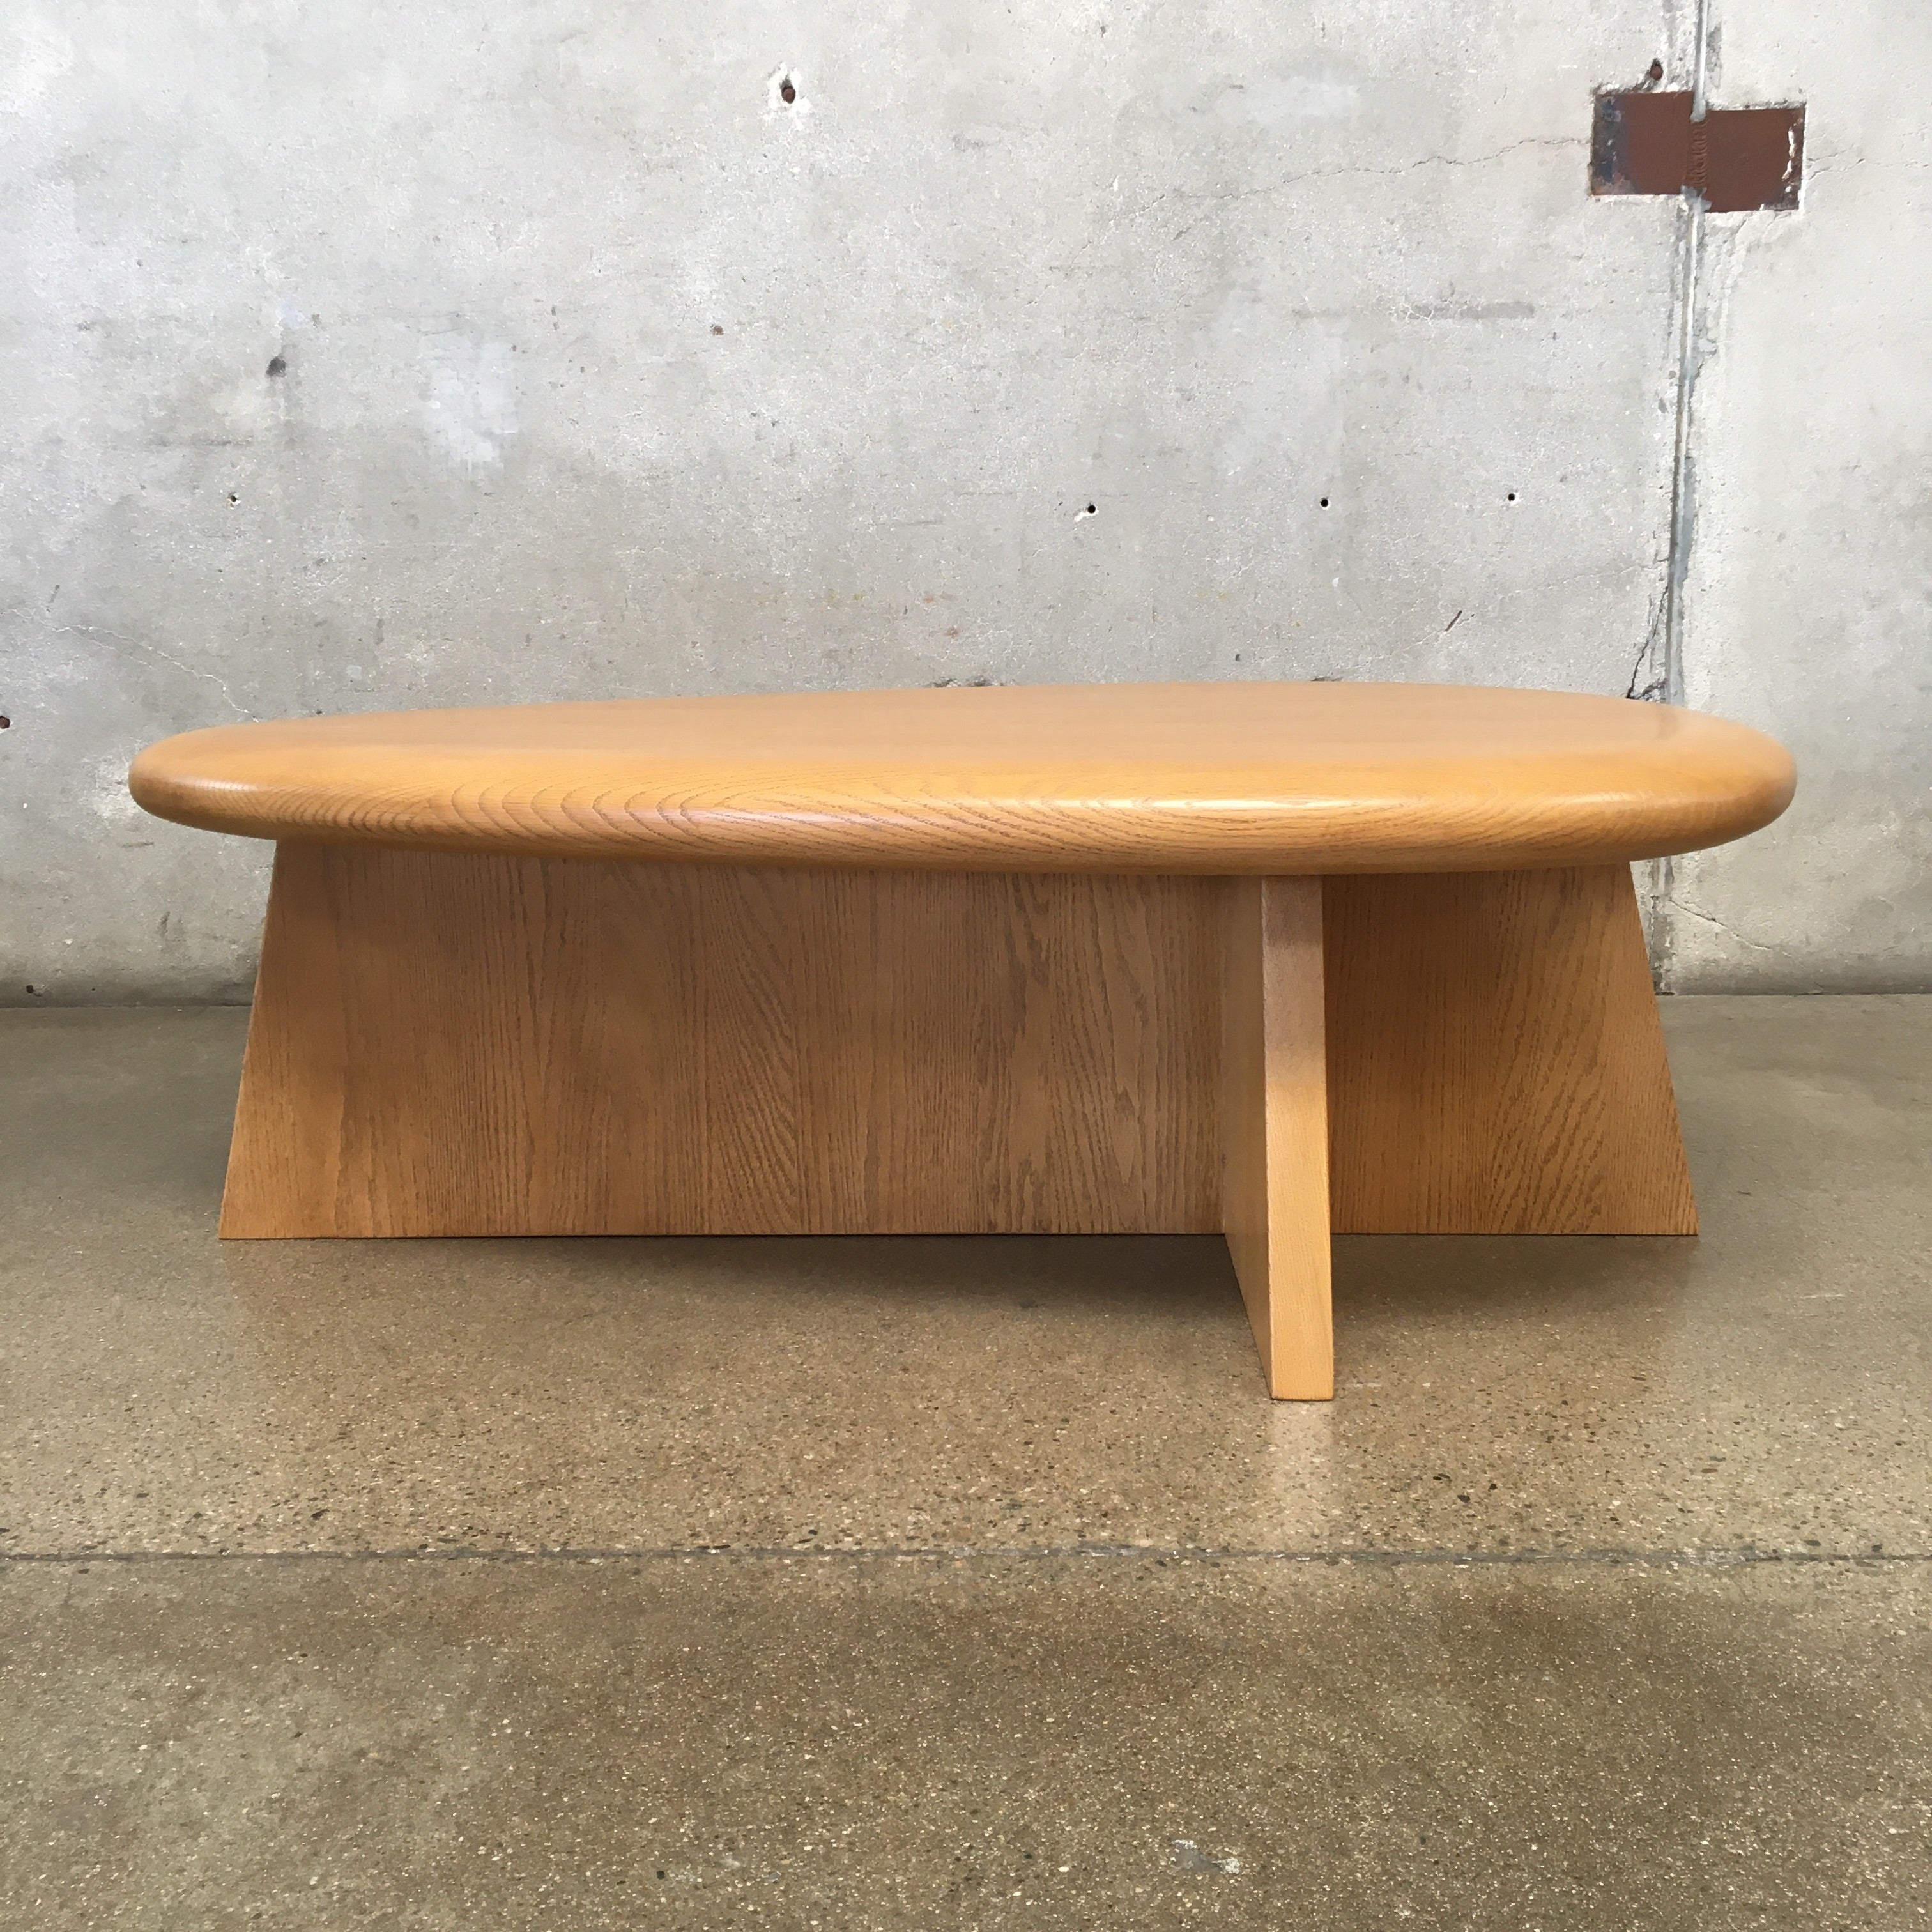 Pisces Coffee Table – Hand-Sanded Red Oak – Sixpenny